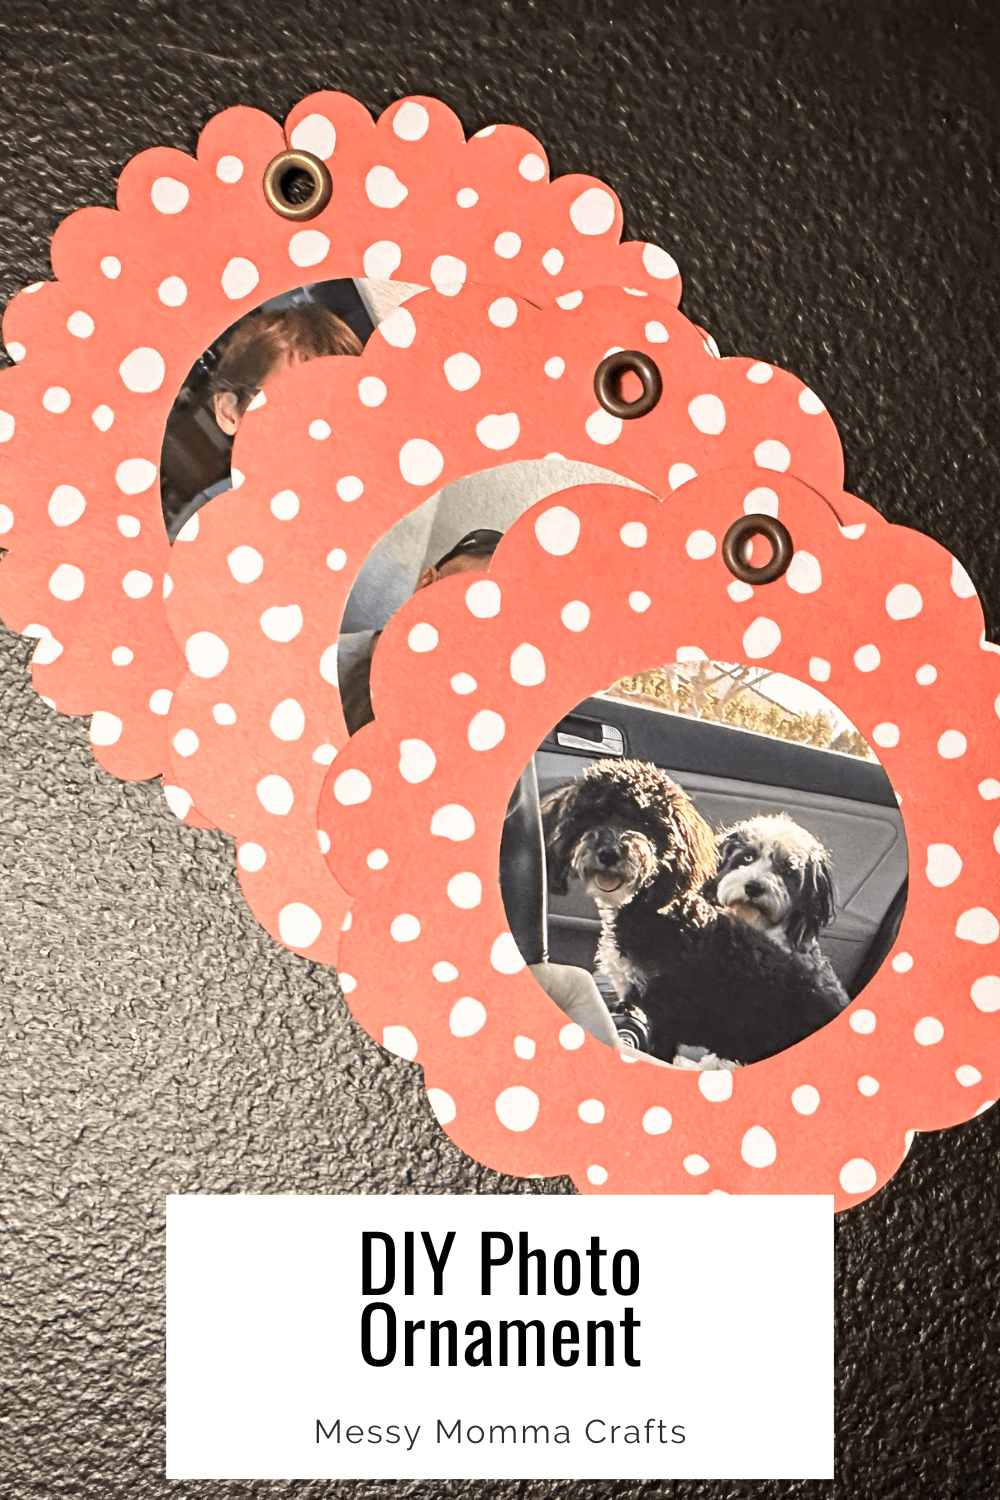 3 DIY photo ornaments, top one shows a picture of 2 dogs. Others the pictures cannot be seen. Patterned paper is red with white dots.